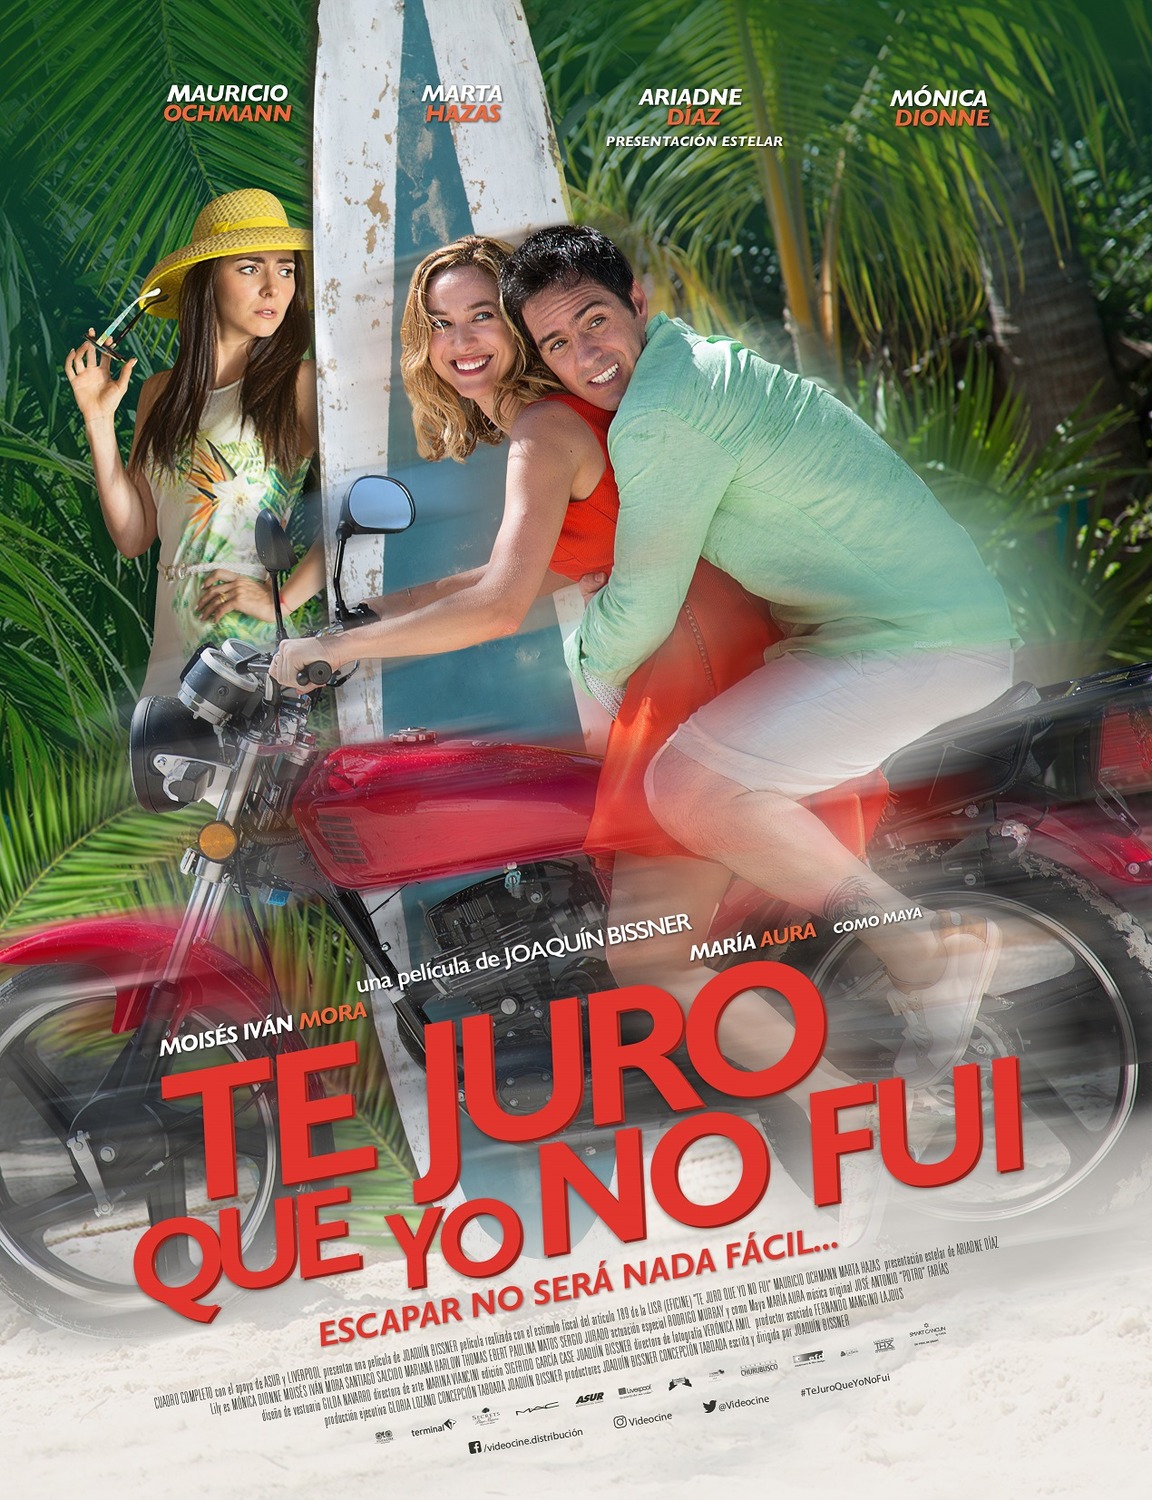 Extra Large Movie Poster Image for Te juro que yo no fui 